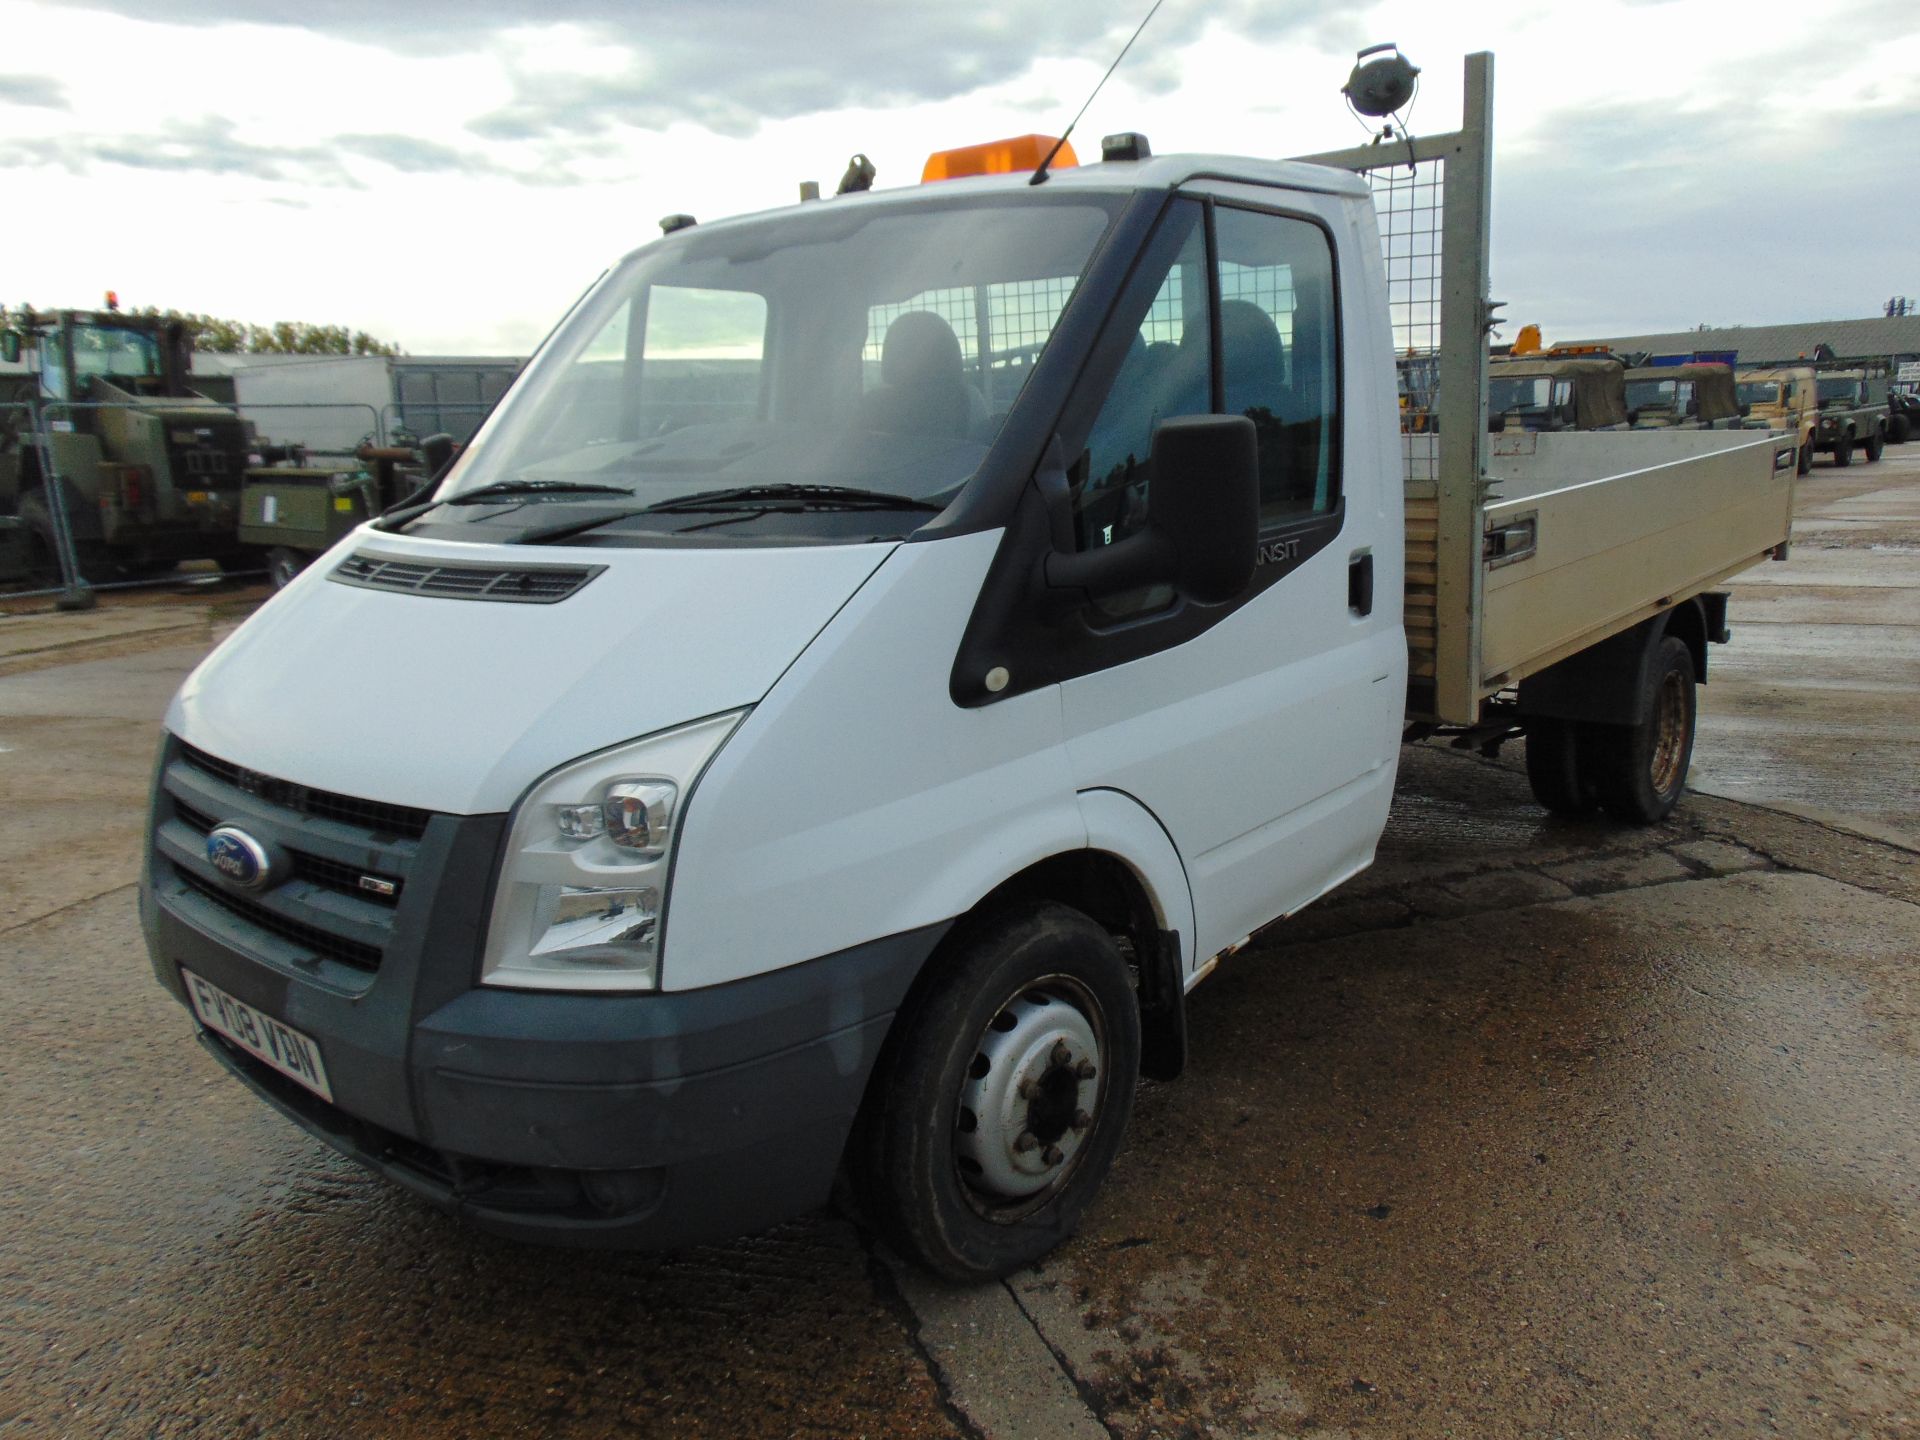 Ford Transit 115 T350 Flat Bed Tipper - Image 4 of 17